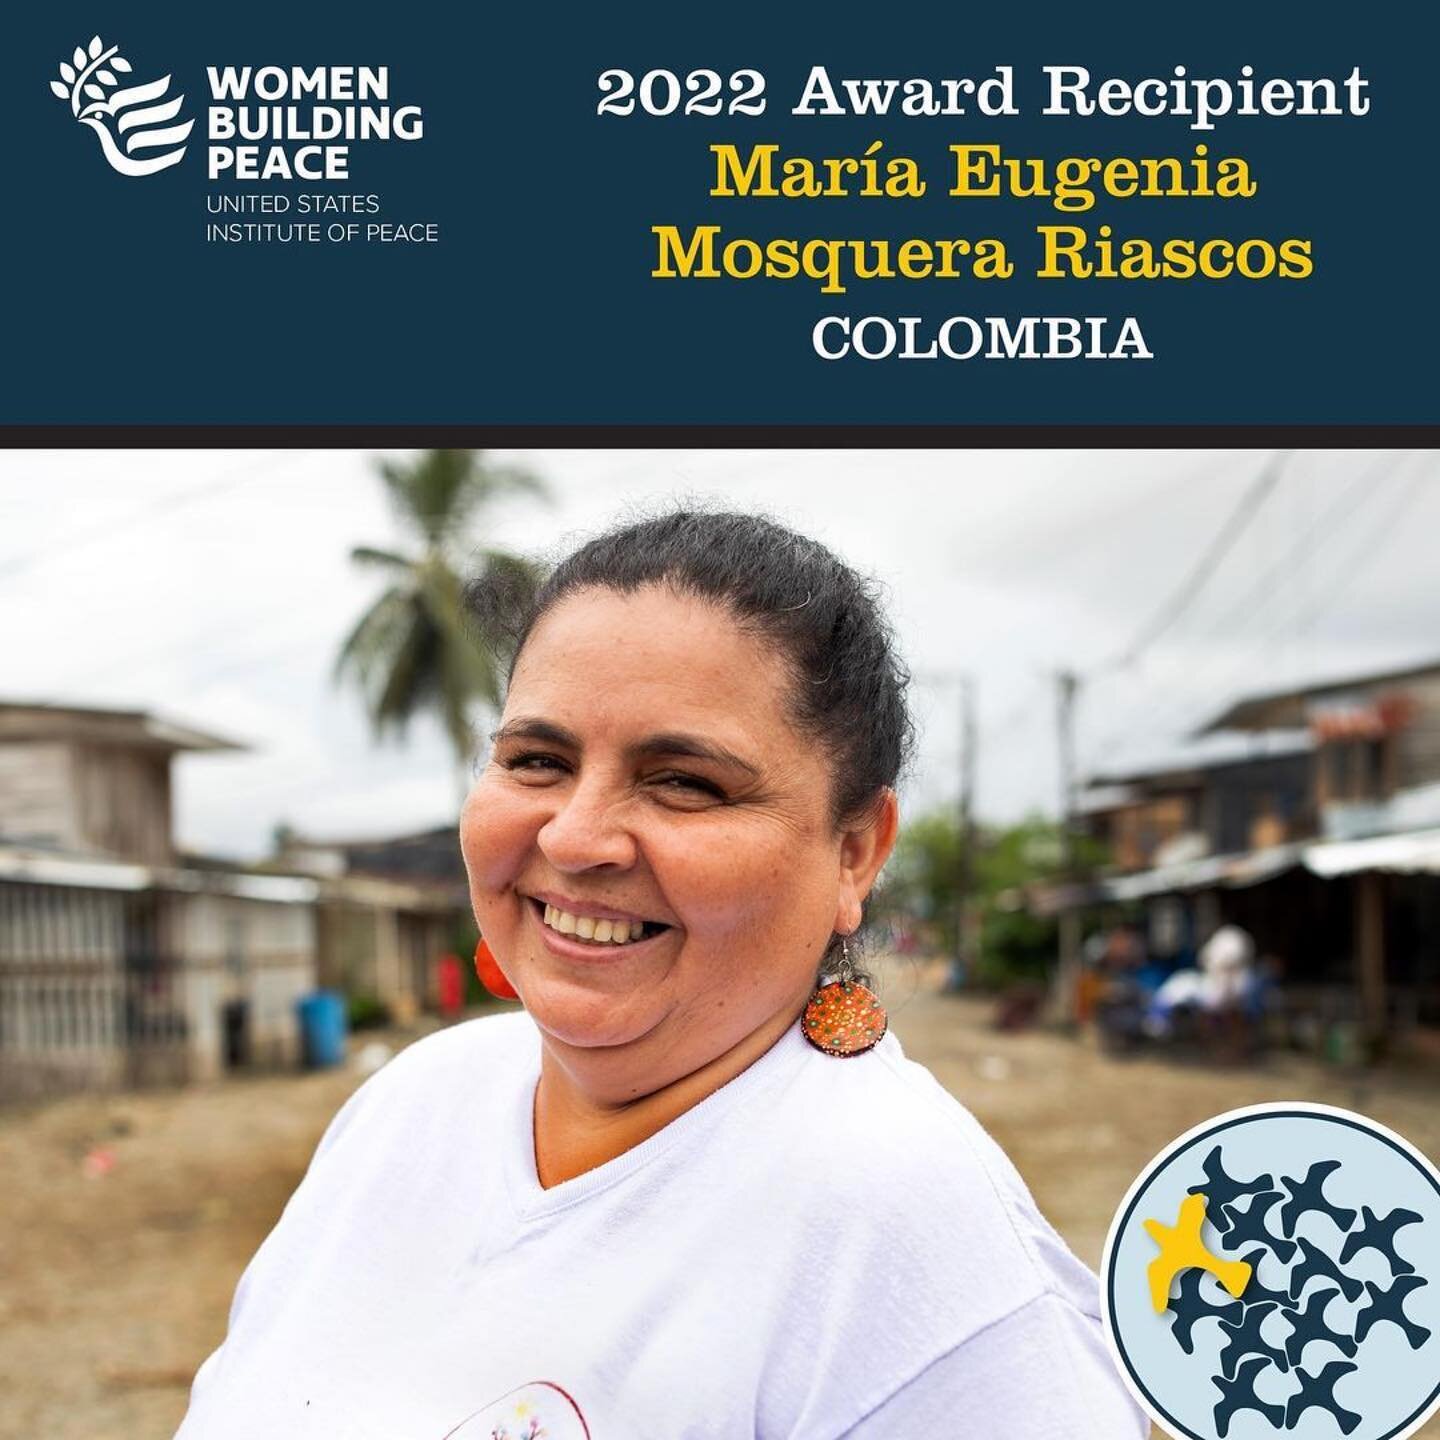 I am so pleased to share this announcement about this year&rsquo;s winner, Mar&iacute;a Eugenia Mosquera Riascos of Colombia! I am a member of the Women Building Peace Council and I am thrilled to be involved with honoring and elevating Maru&rsquo;s 